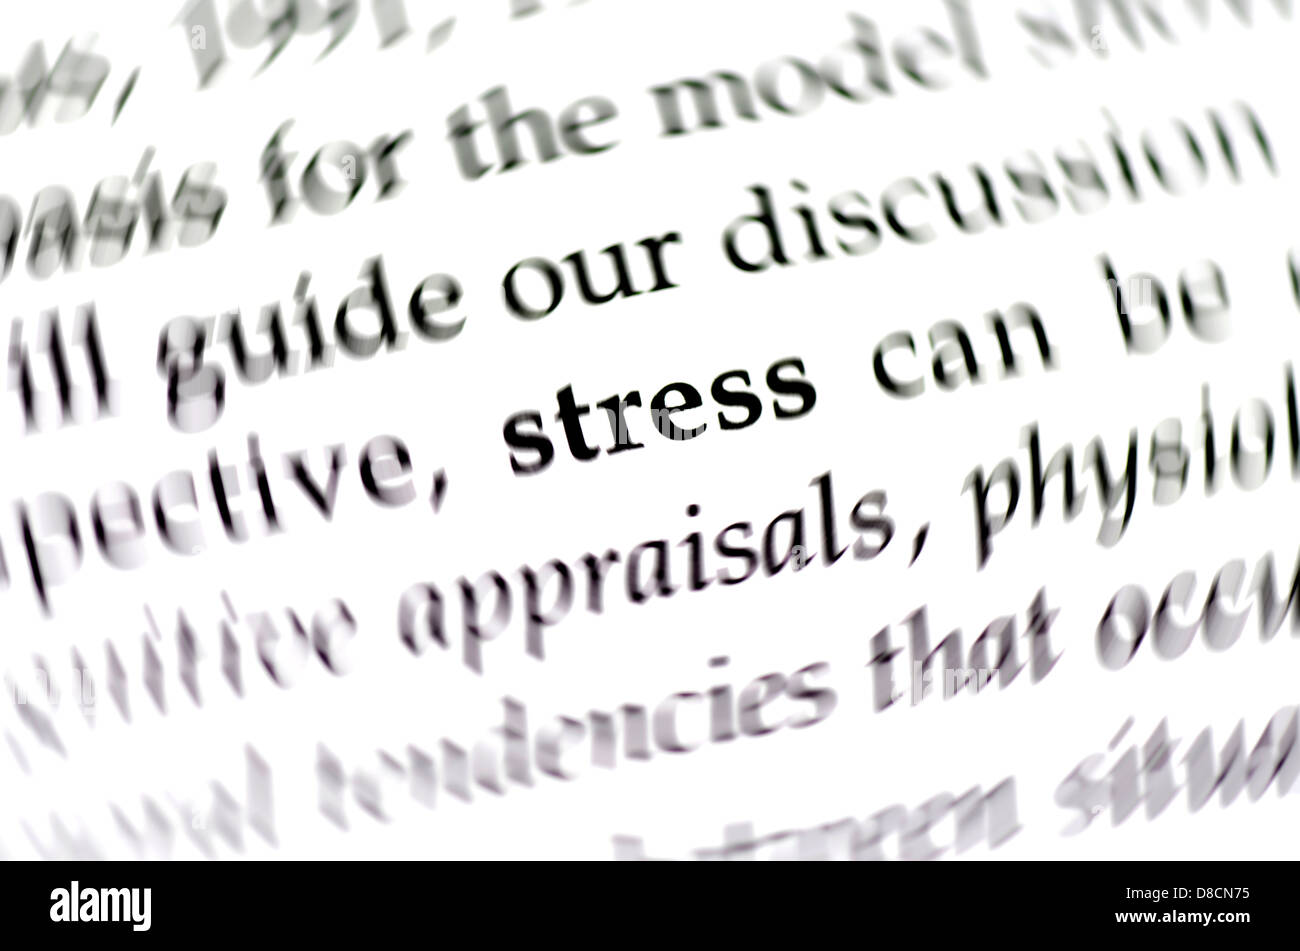 the word stress surrounded by blurred words Stock Photo